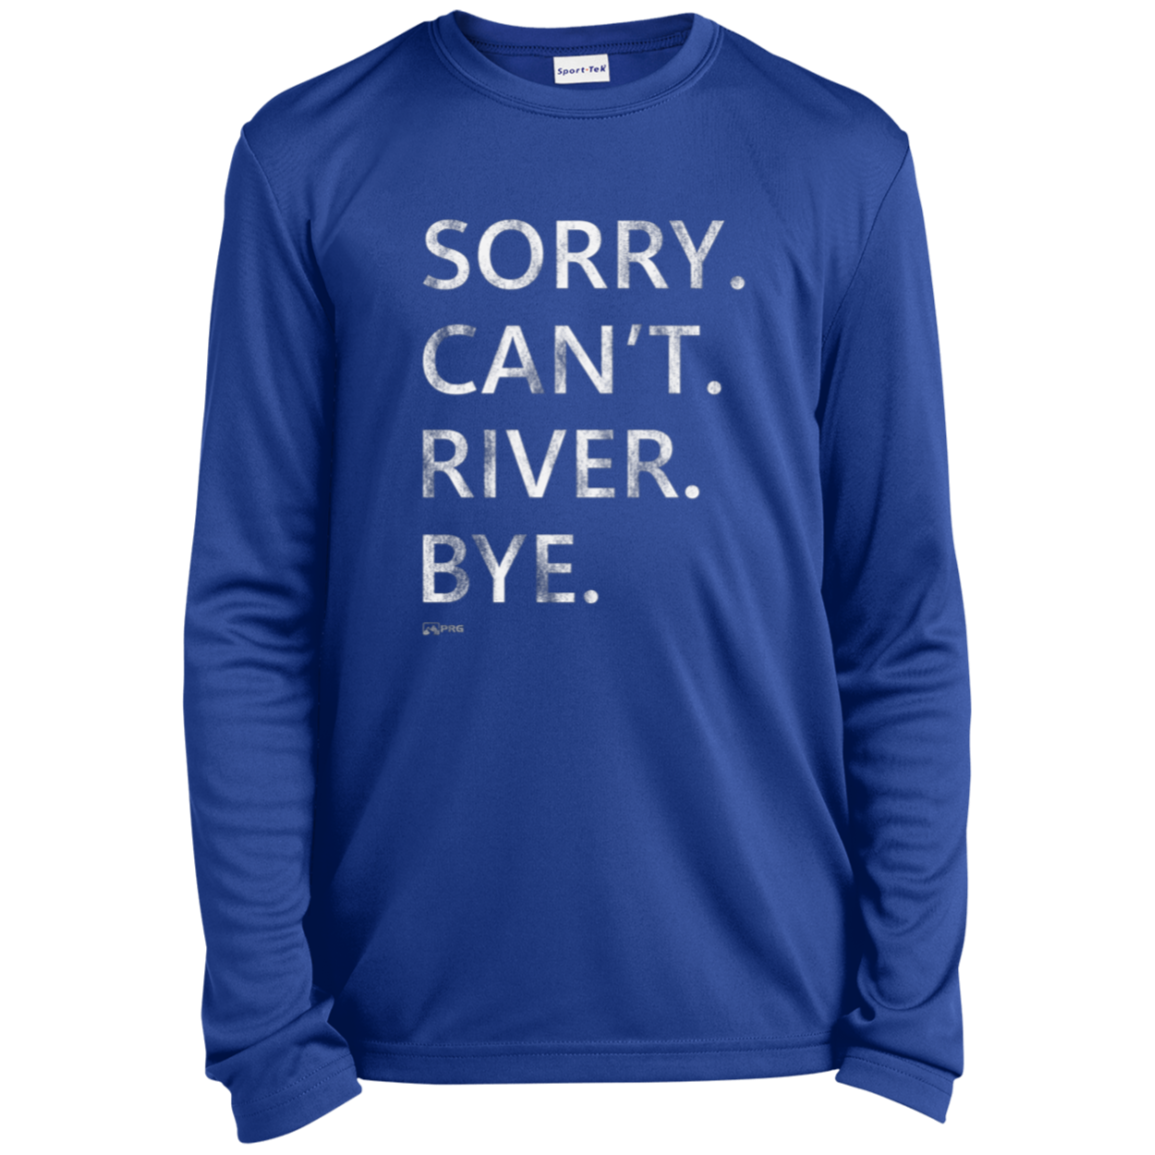 Sorry. Can't. River. Bye. - Youth Long Sleeve